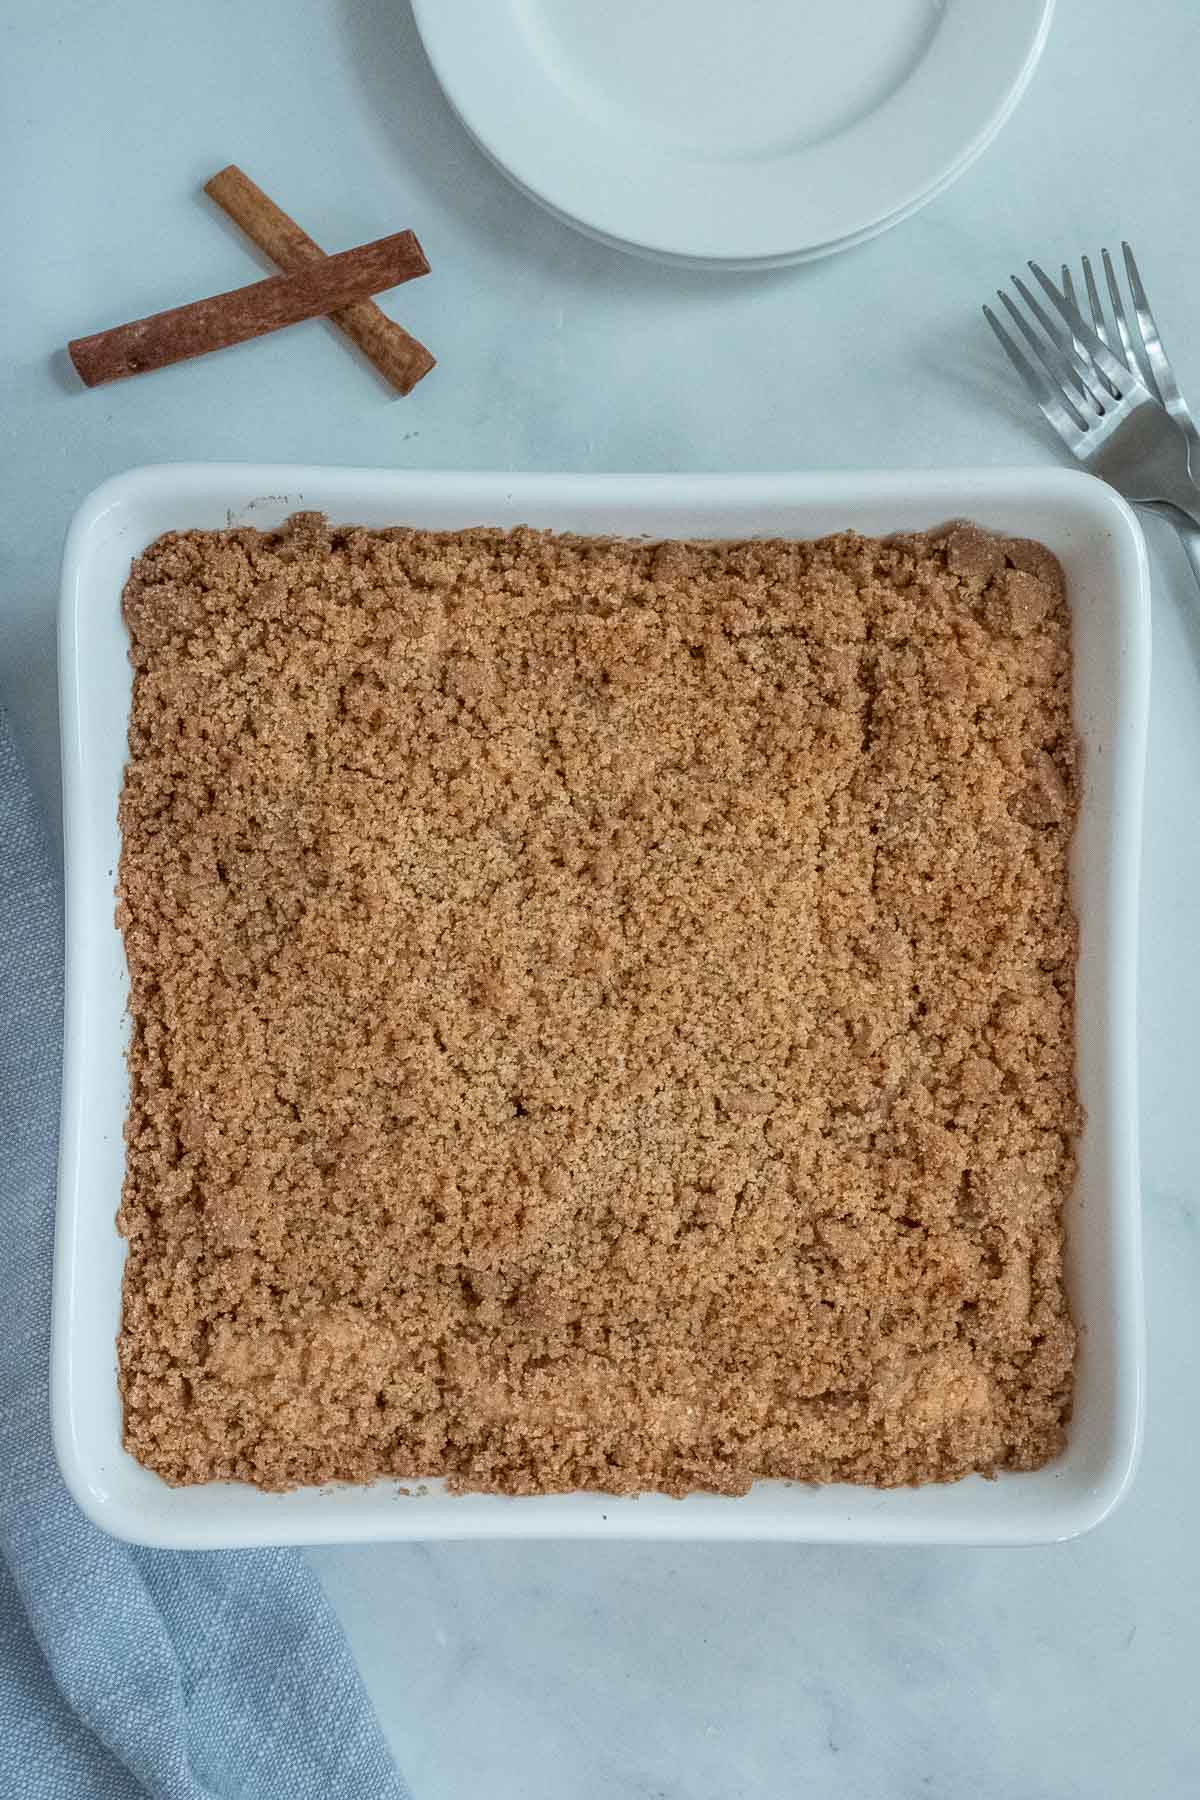 baked coffee cake in a square white baking dish with a blue napkin and white plates next to it